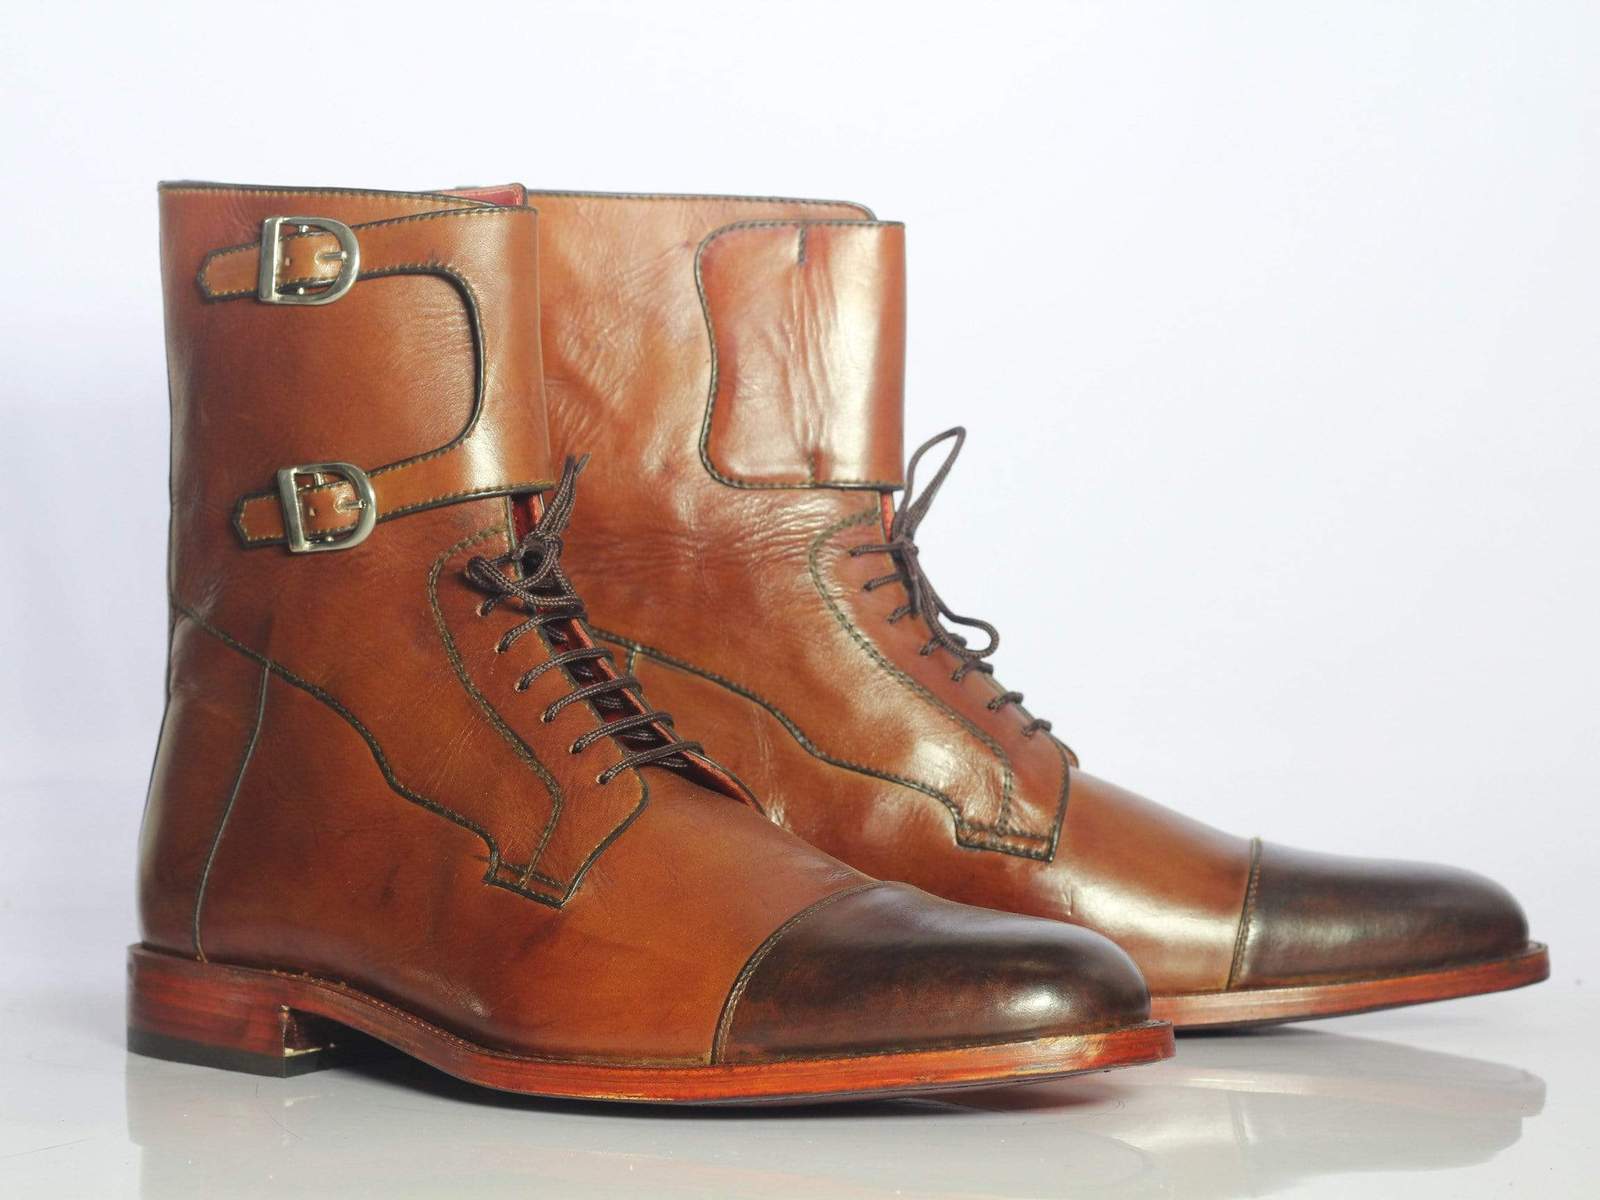 Bespoke Two Tone Leather Buckle Lace Up Boots For Men's - Boots